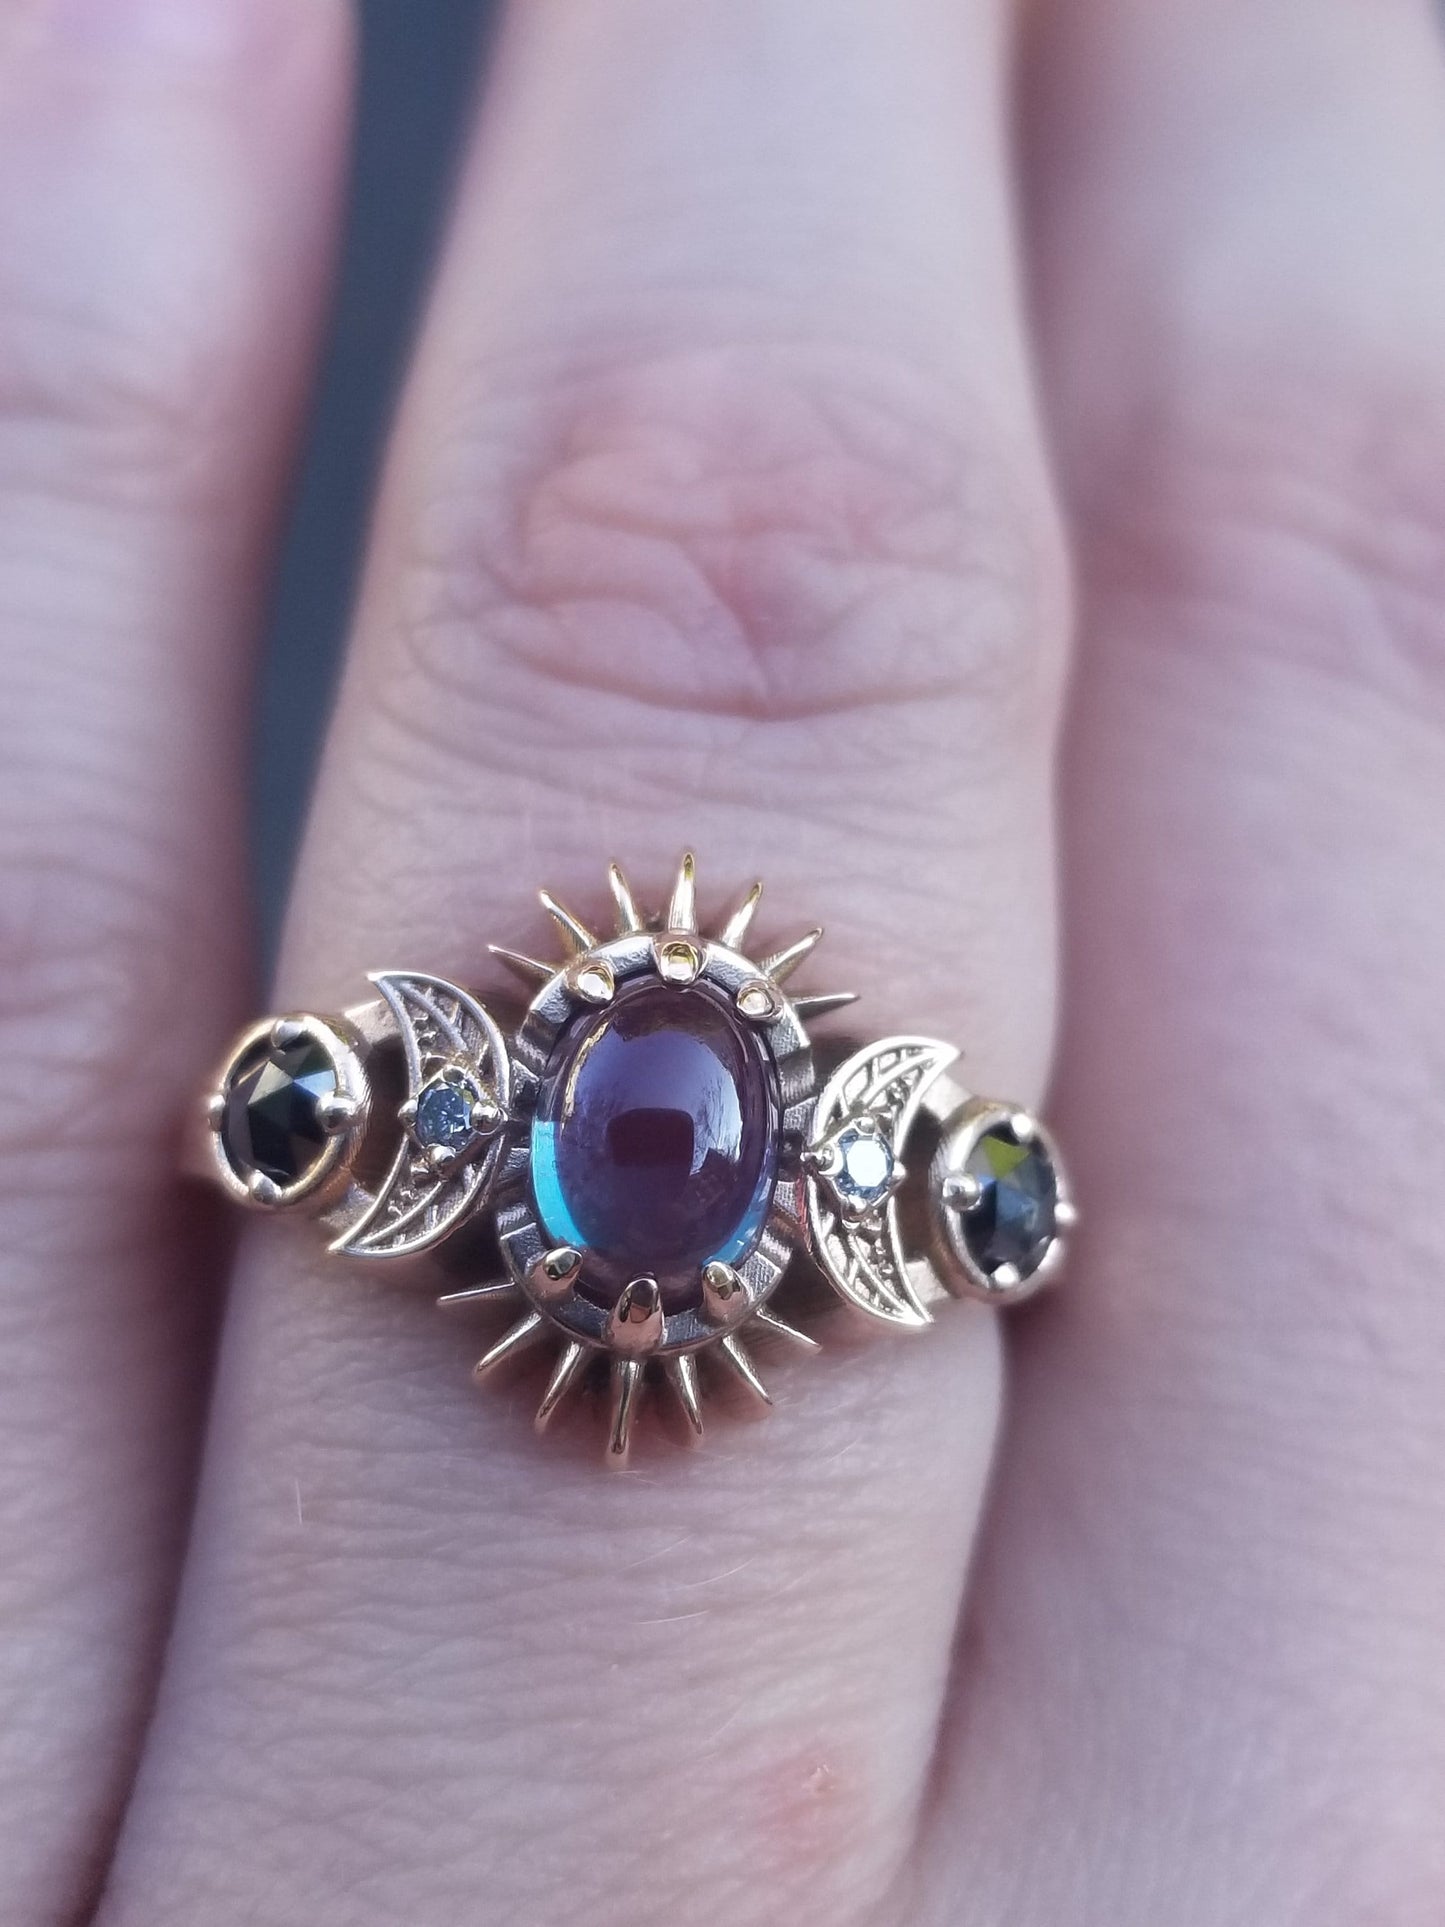 Oval Lab Alexandrite Frigg Engagement Ring with Salt & Pepper and Black Diamonds - Engagement Ring with Crescent Moons and Split Shank